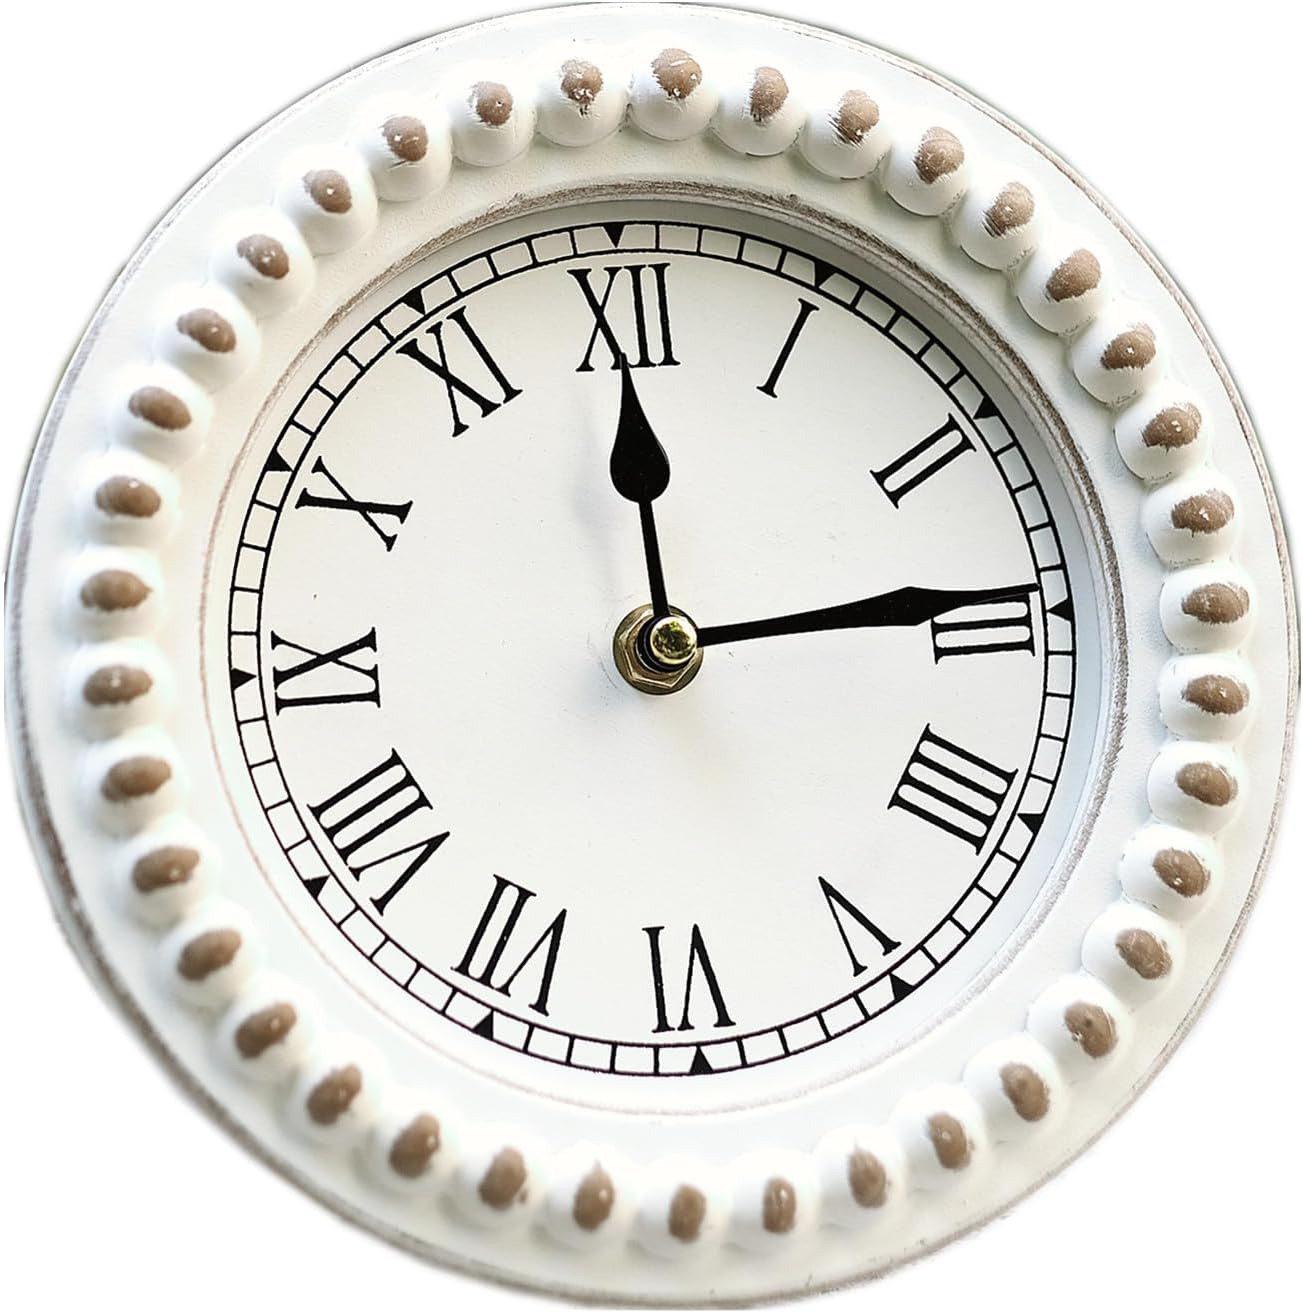 Farmhouse Table Top Clock with Wooden Beads-Mantal Tabletop Clcok-Desk Clock-Sma